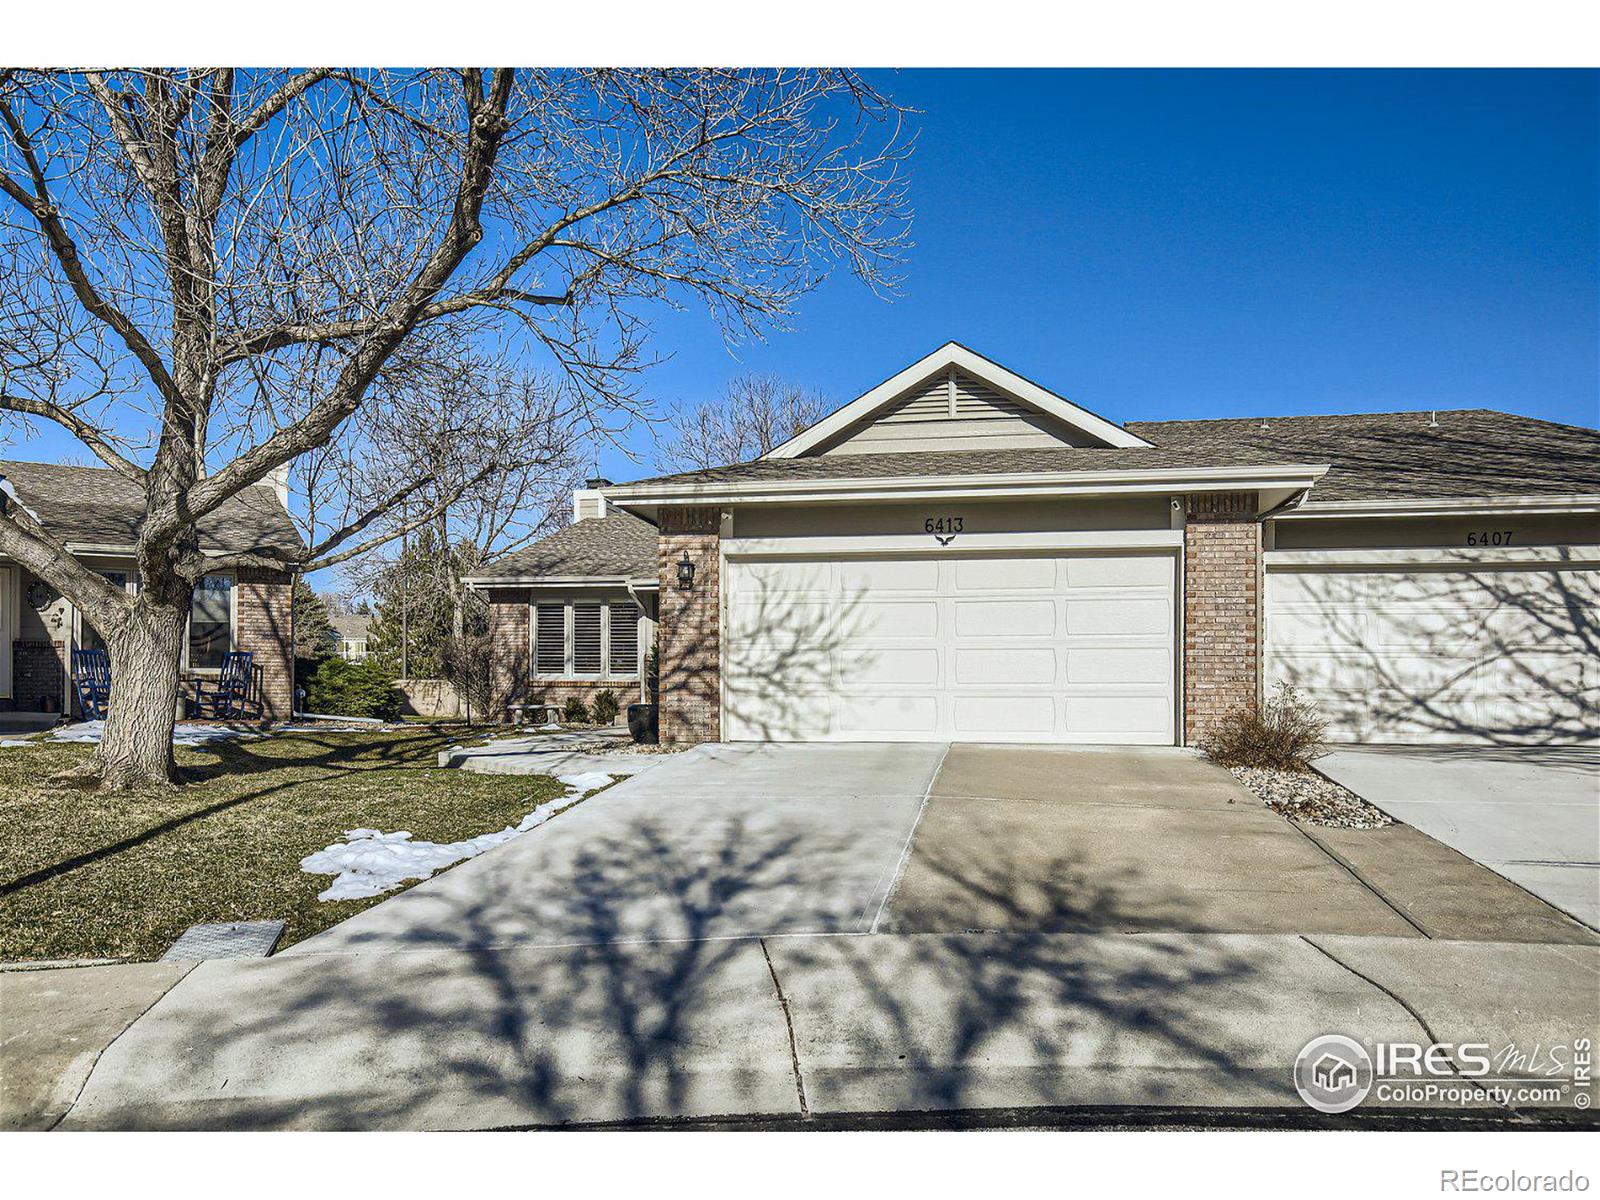 6413  Finch Court, fort collins MLS: 4567891005624 Beds: 3 Baths: 3 Price: $545,900